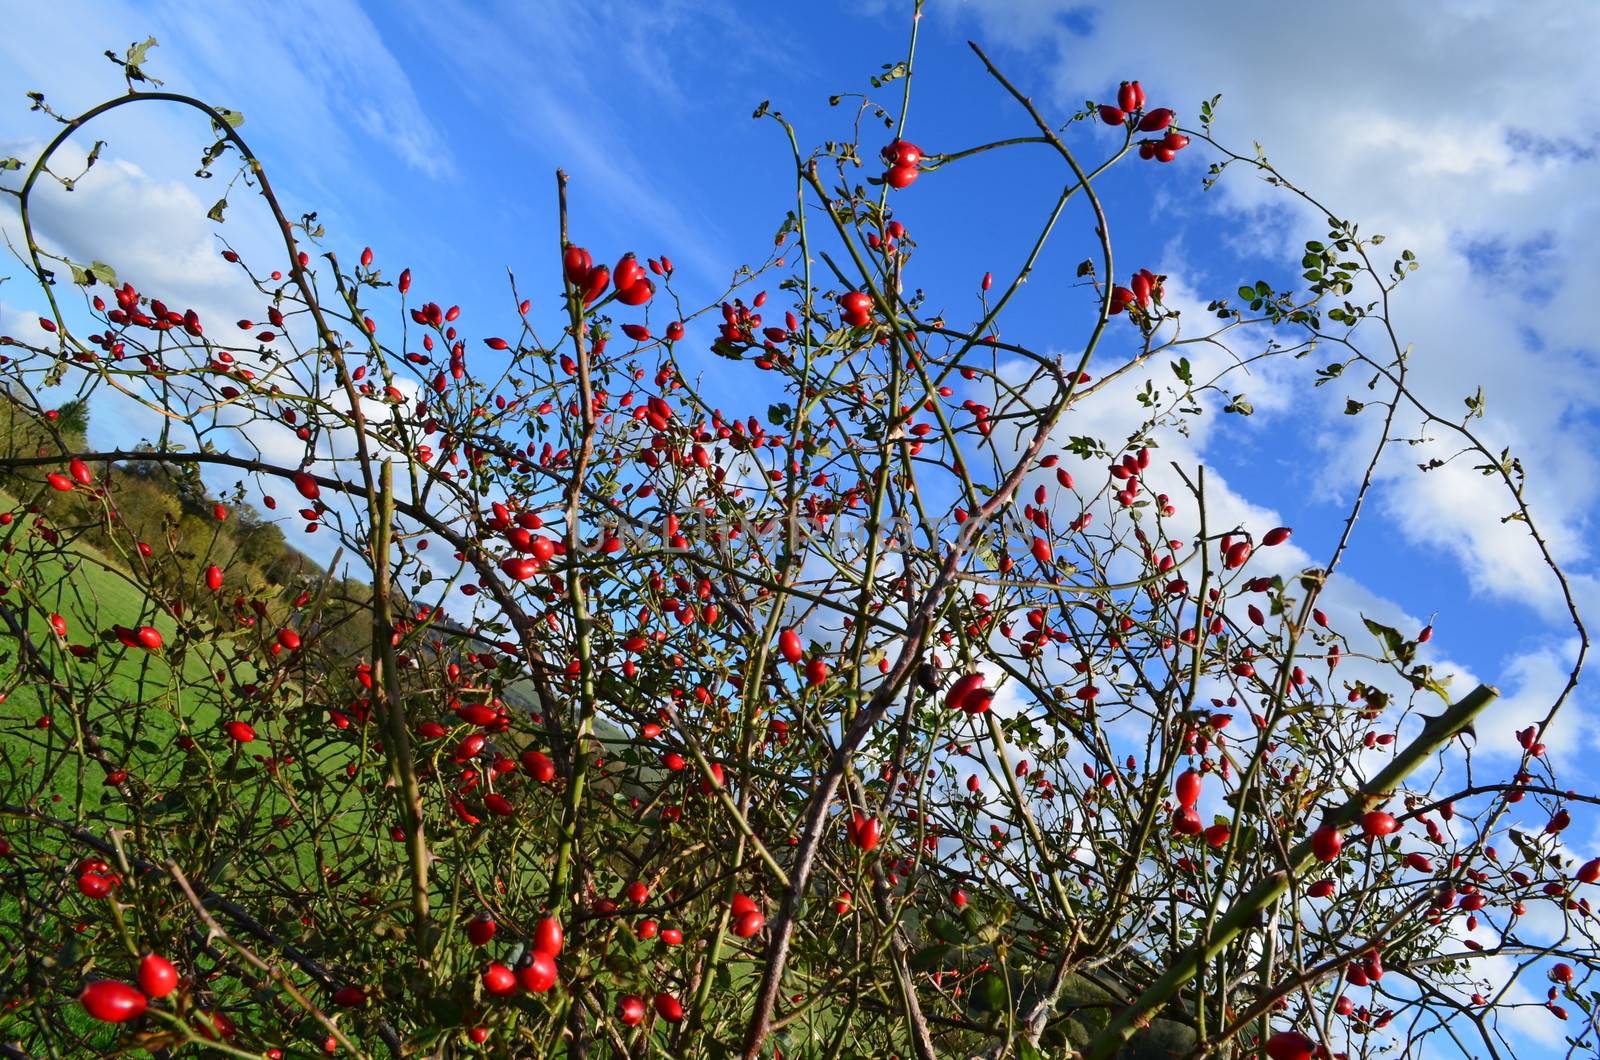 Wild red honeysuckle berries in the English countryside.Shot taken in Autumn 2013.